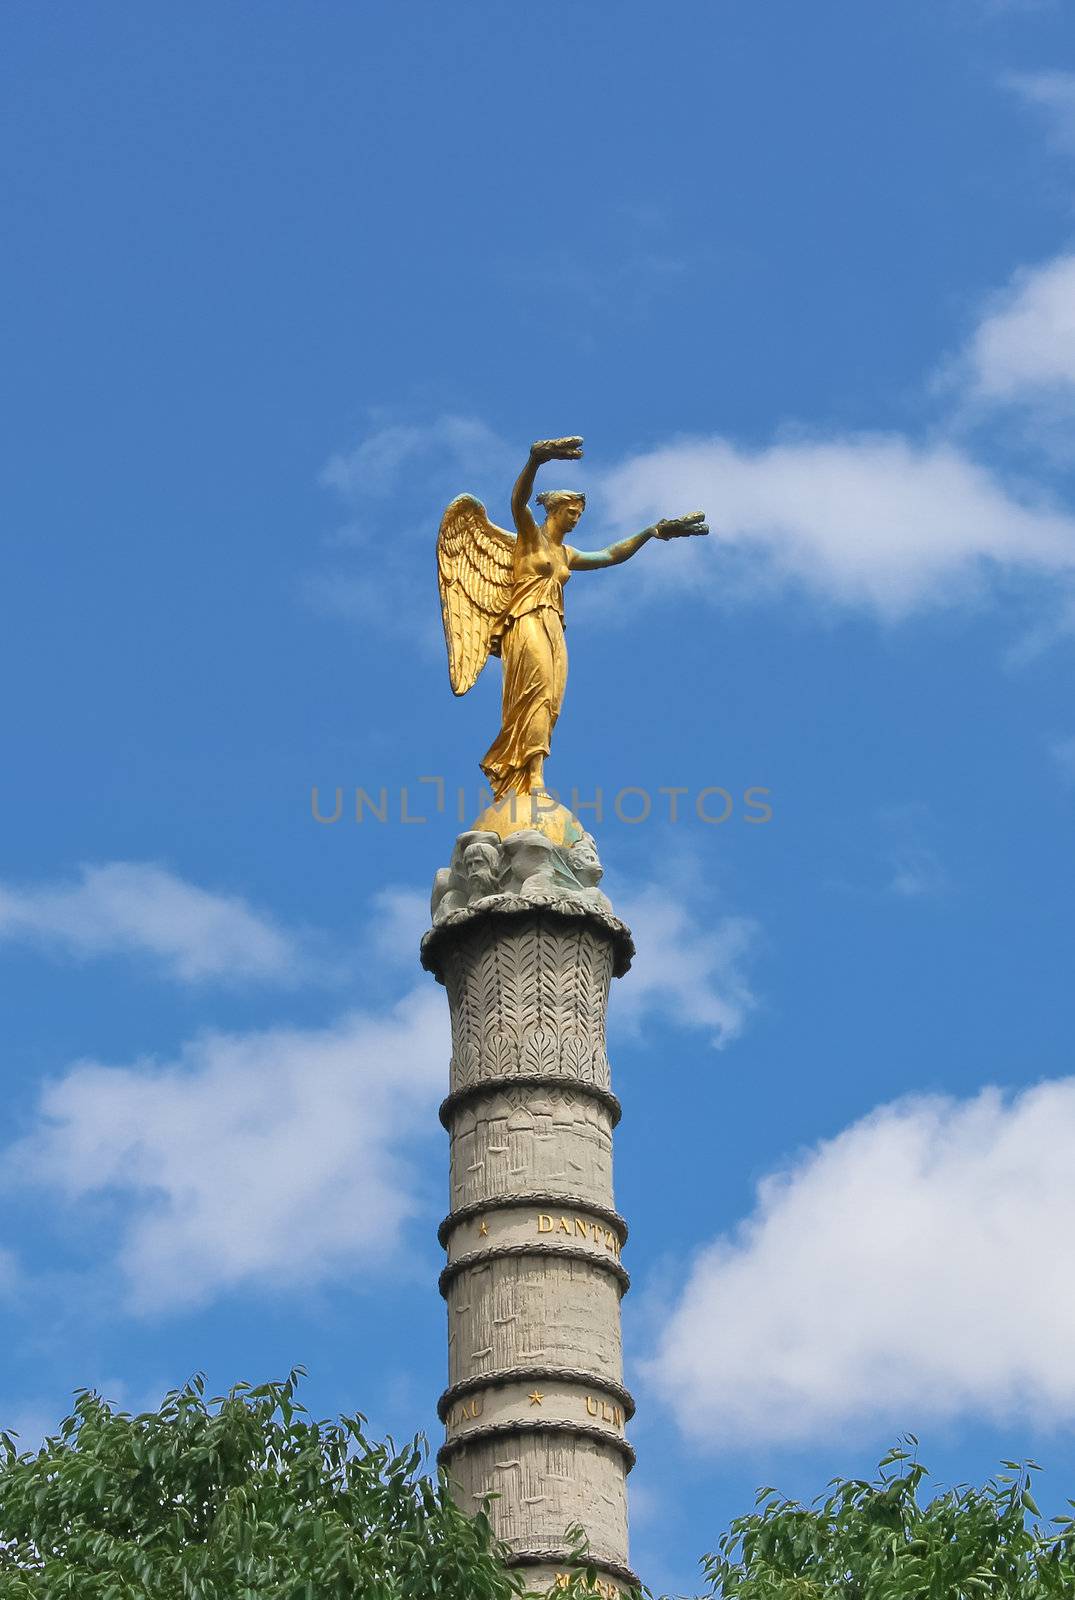 The Victory statue on the column in the palmier fountain in Pari by NickNick